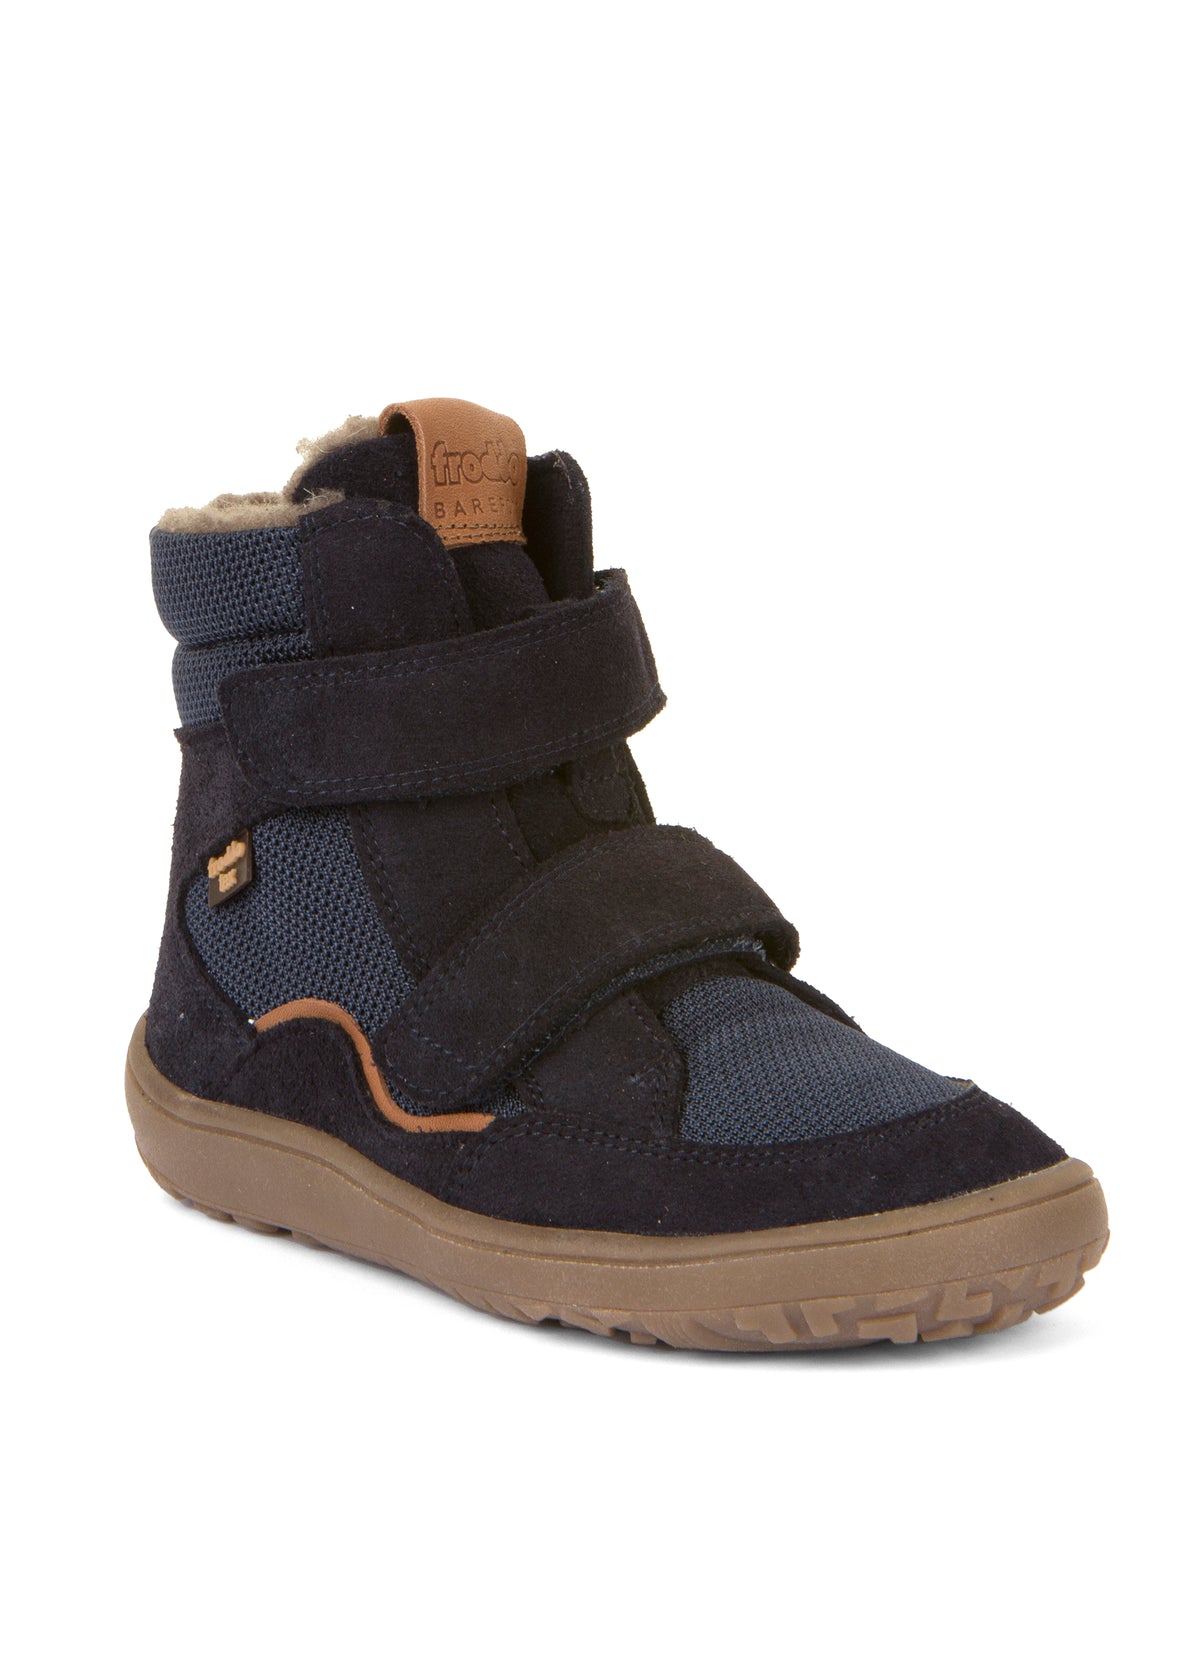 Children's barefoot shoes - winter shoes with TEX membrane - dark blue